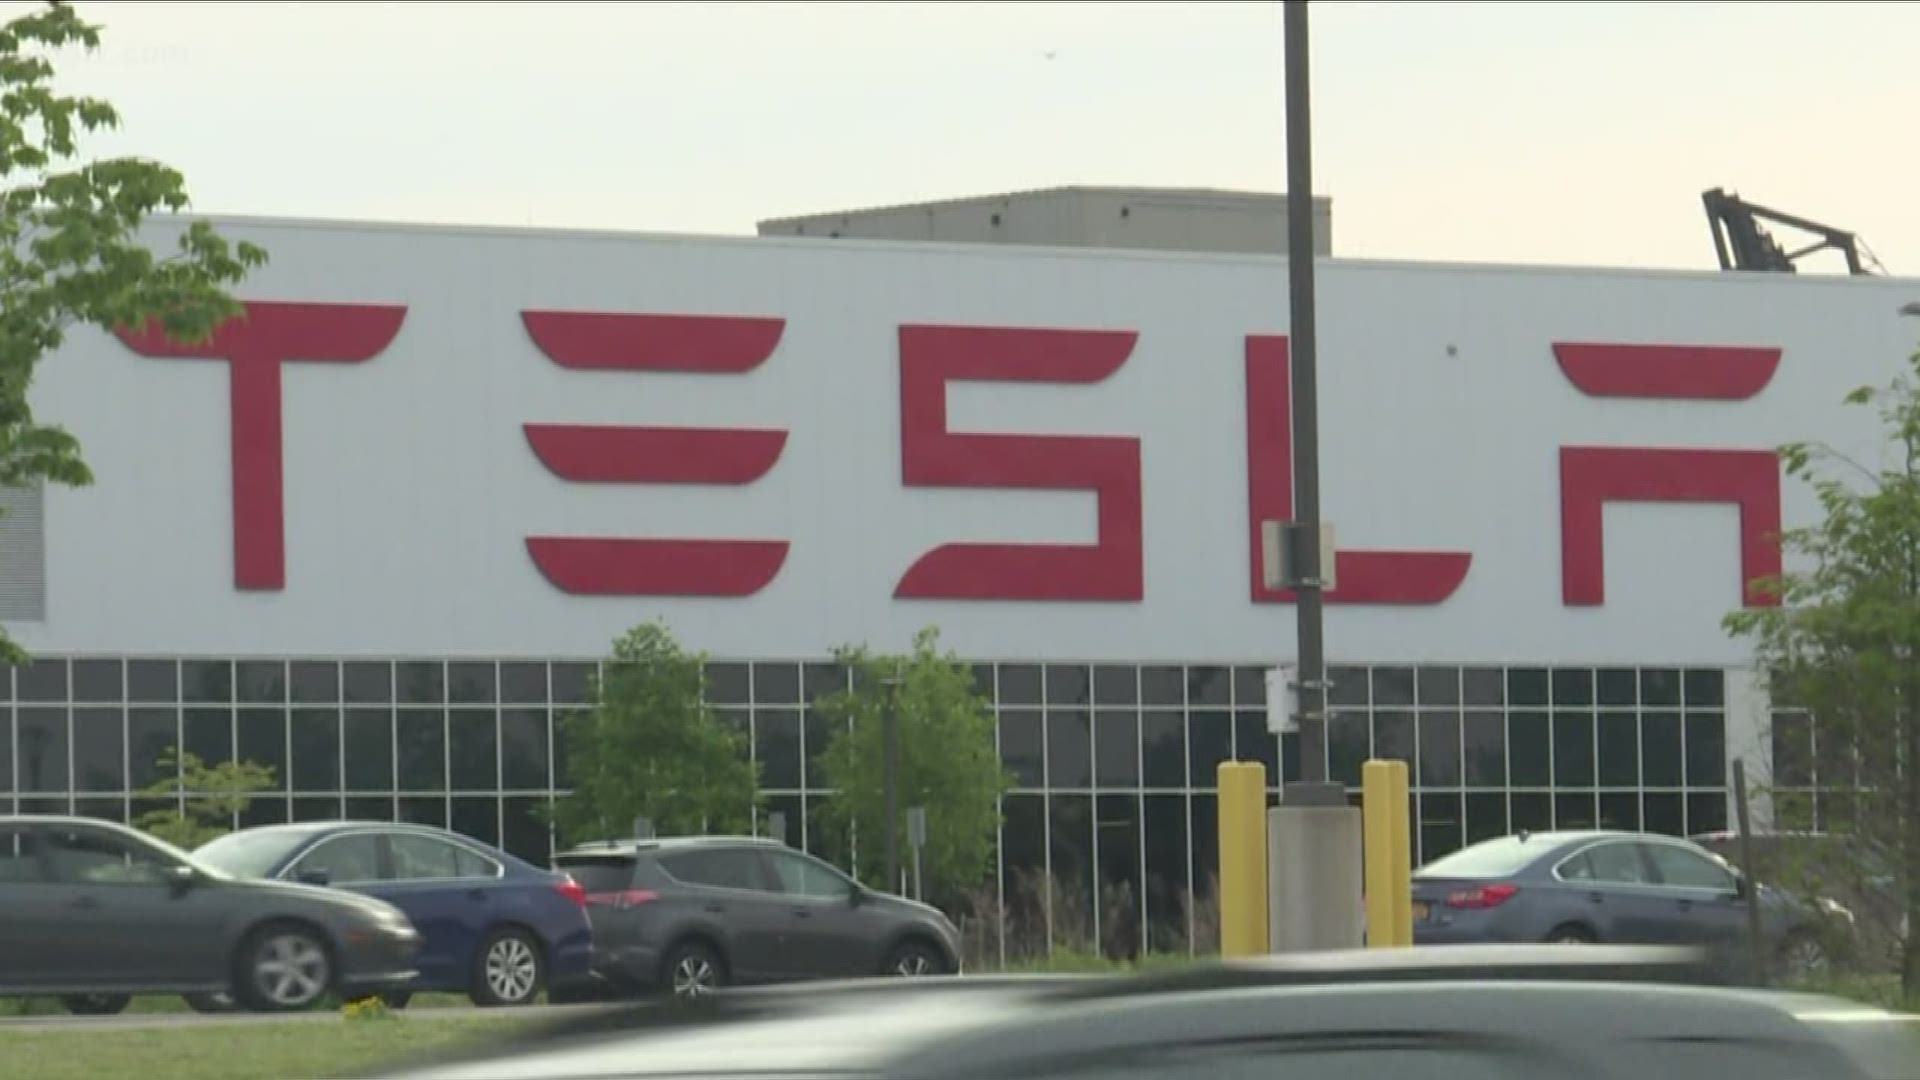 Tesla says they are still on track for Buffalo Job Goals even though solar installations are down for the company.